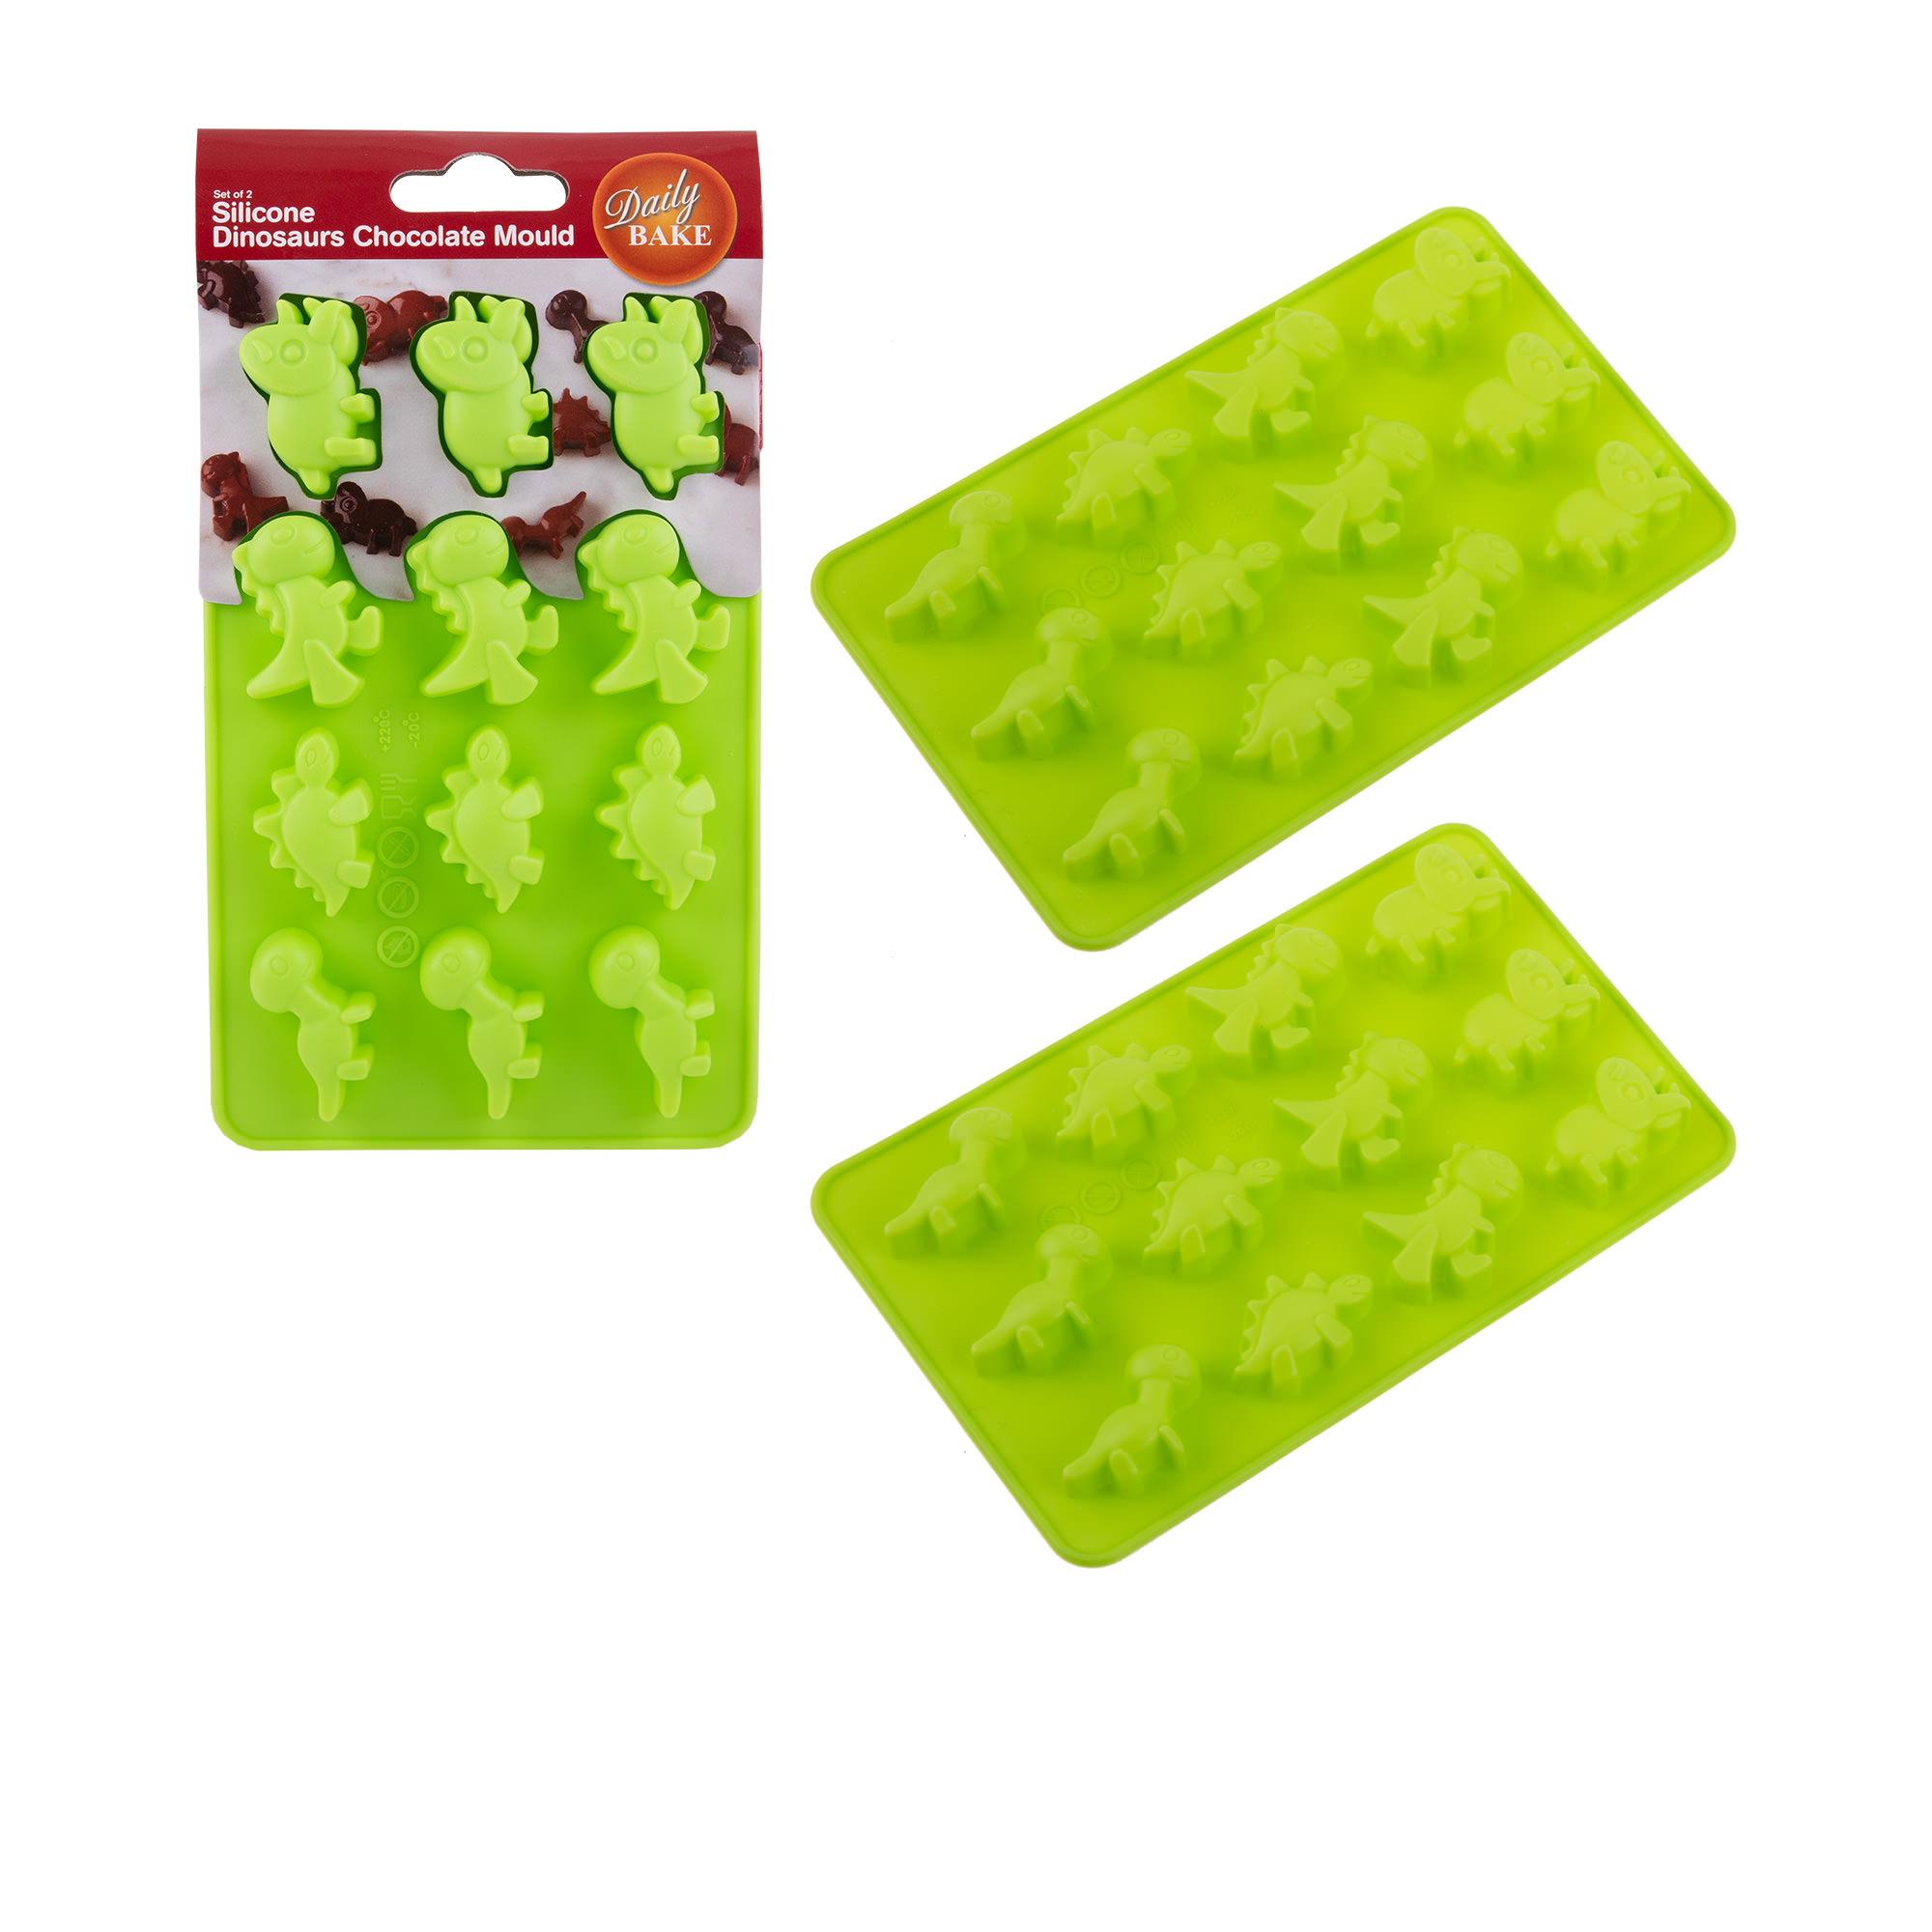 Daily Bake Dinosaur 12 Cup Chocolate Mould Set 2pc Green Image 3